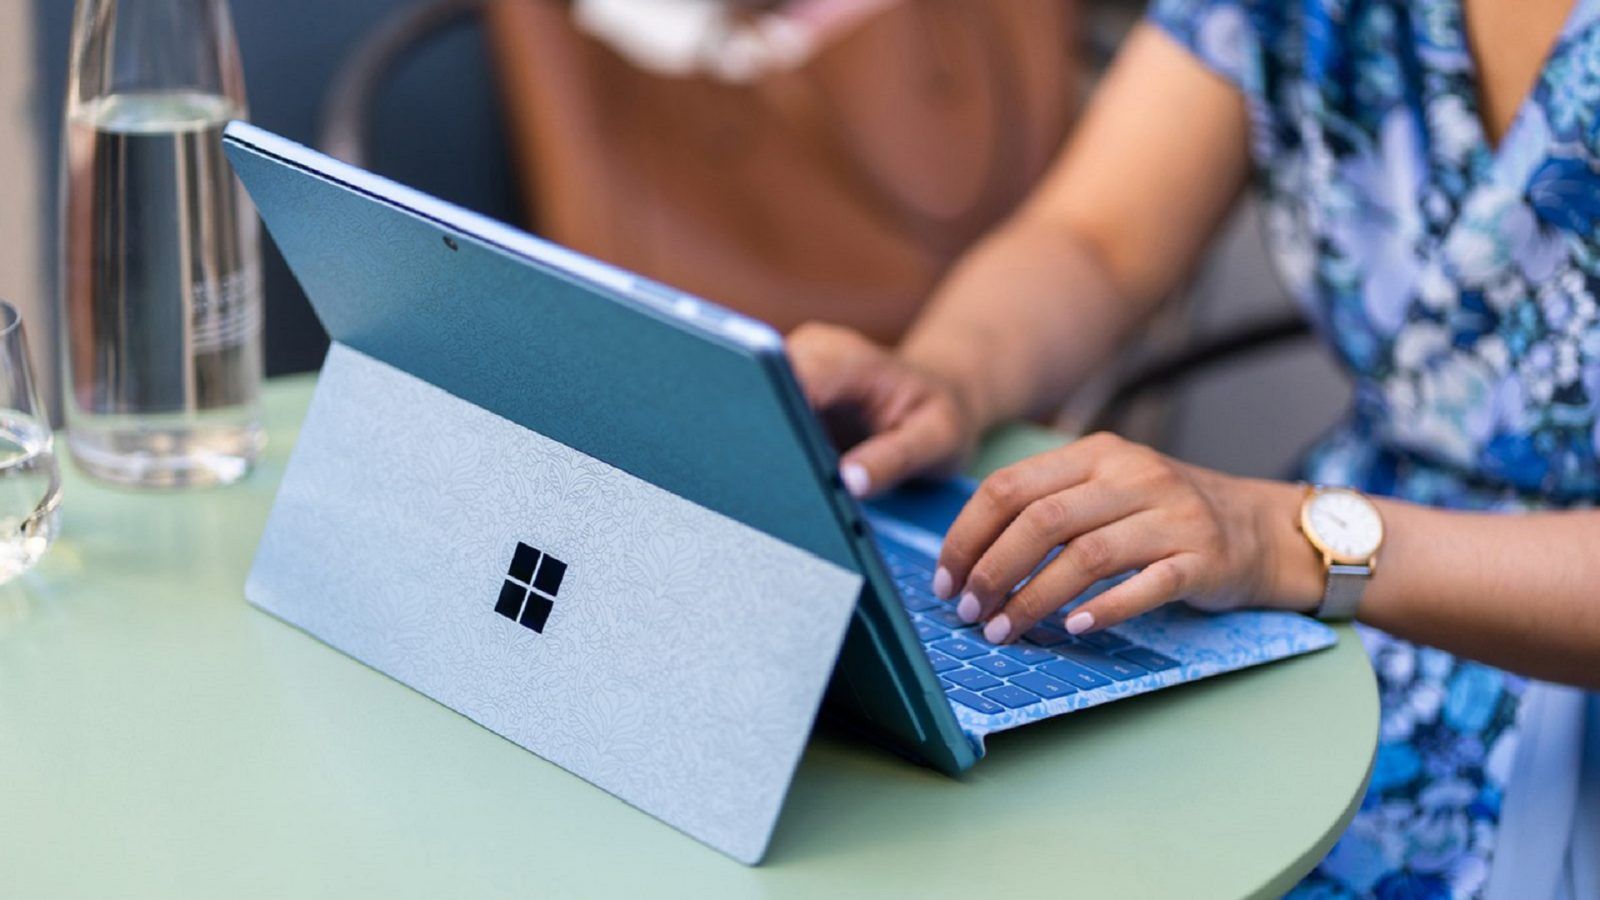 Surface Pro X, Surface Pro 7, and Surface Laptop 3 are now available in  India - Microsoft Stories India